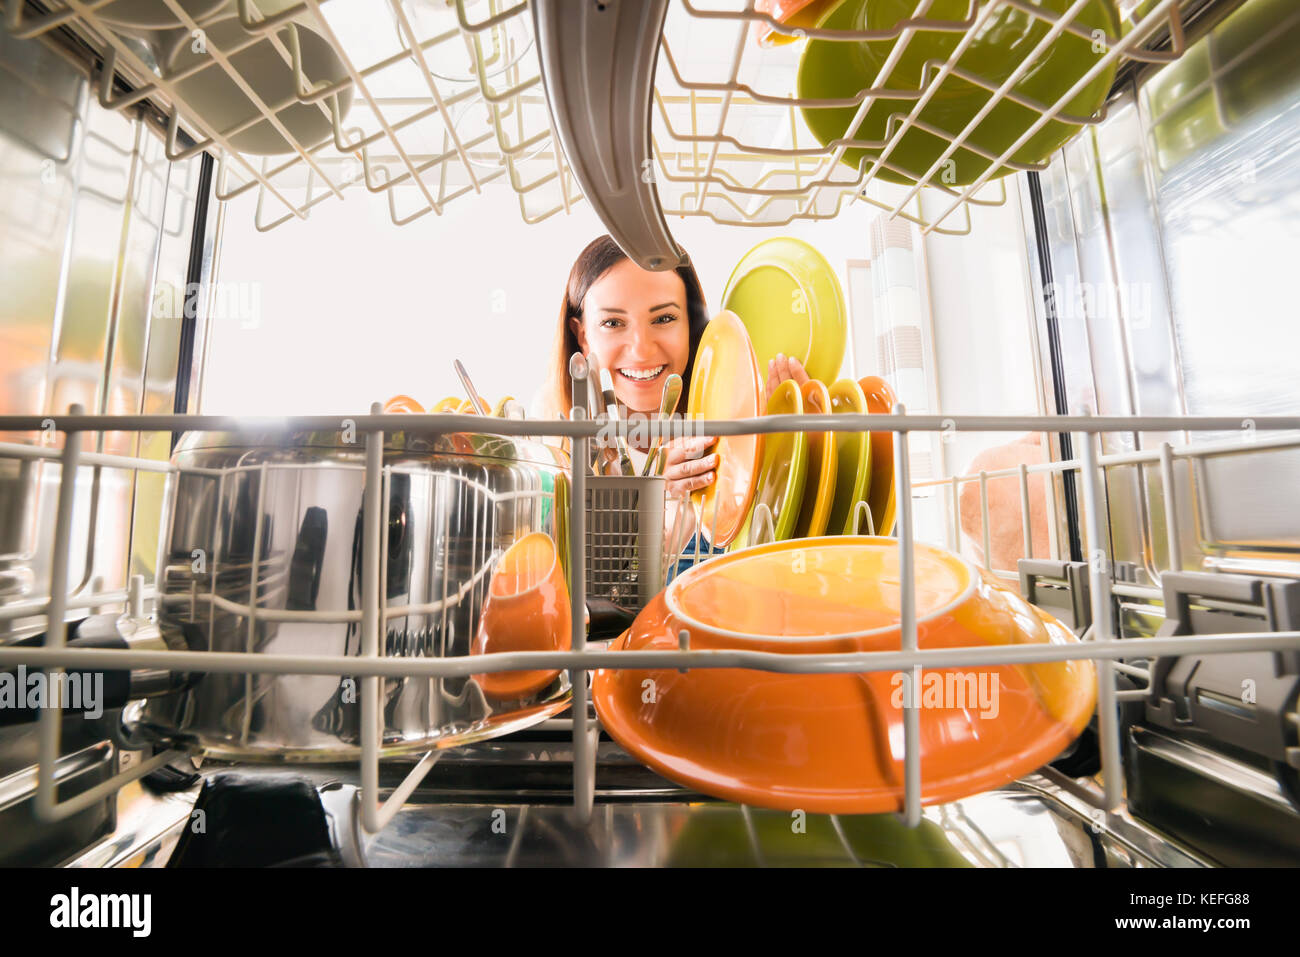 Young Happy Woman Arranging Plates In Dishwasher Stock Photo